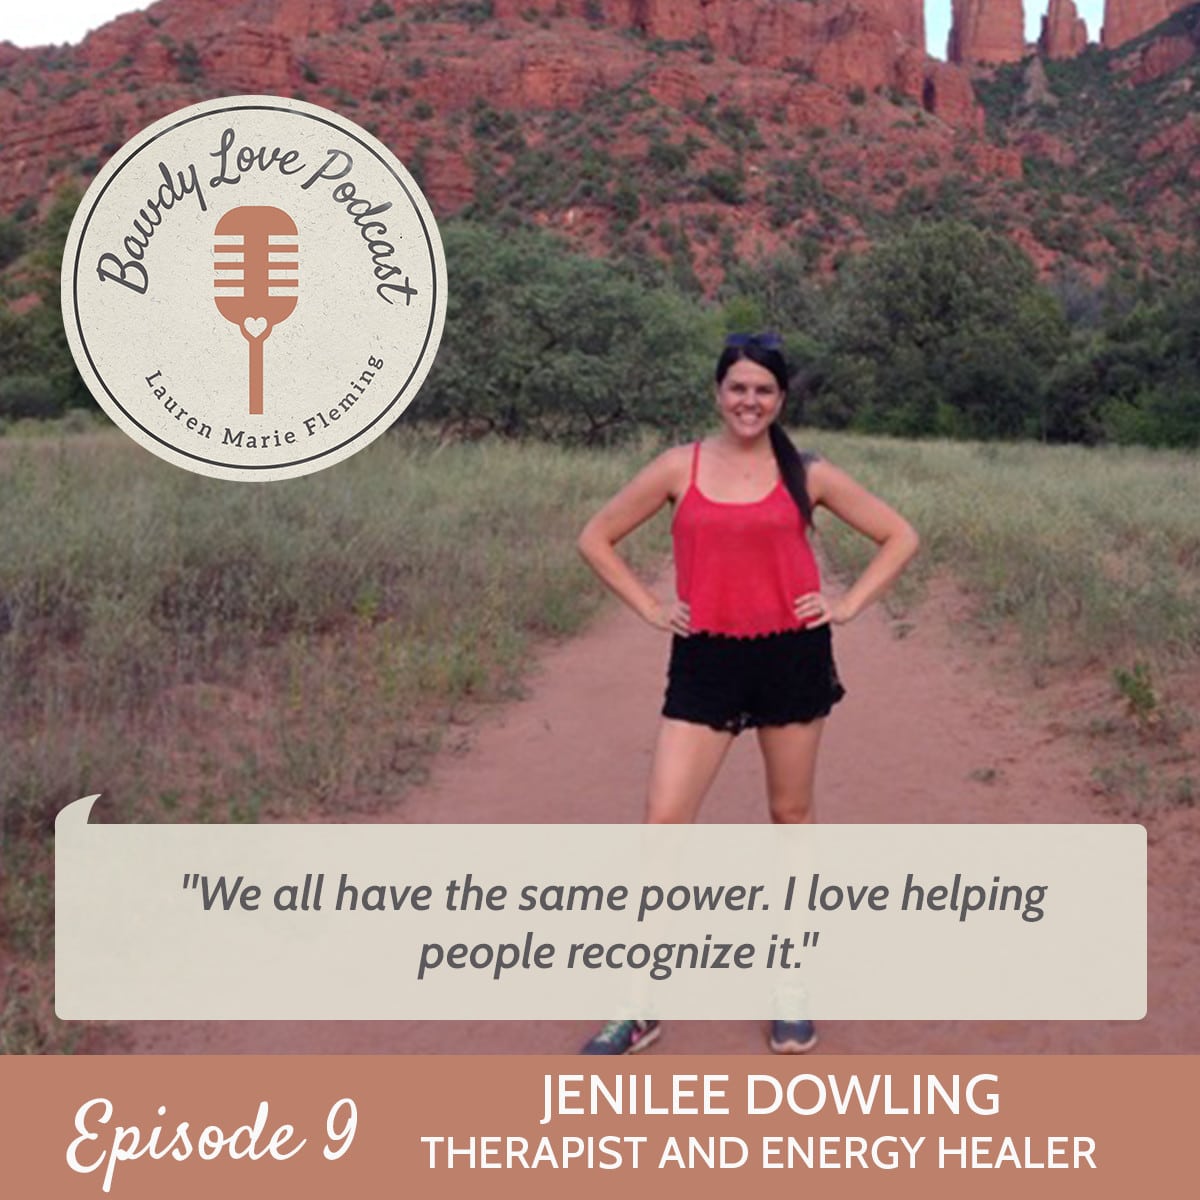 This week on Bawdy Love: Jenilee Dowling on the energetic healing of bodies and being your own Ultimate Woman